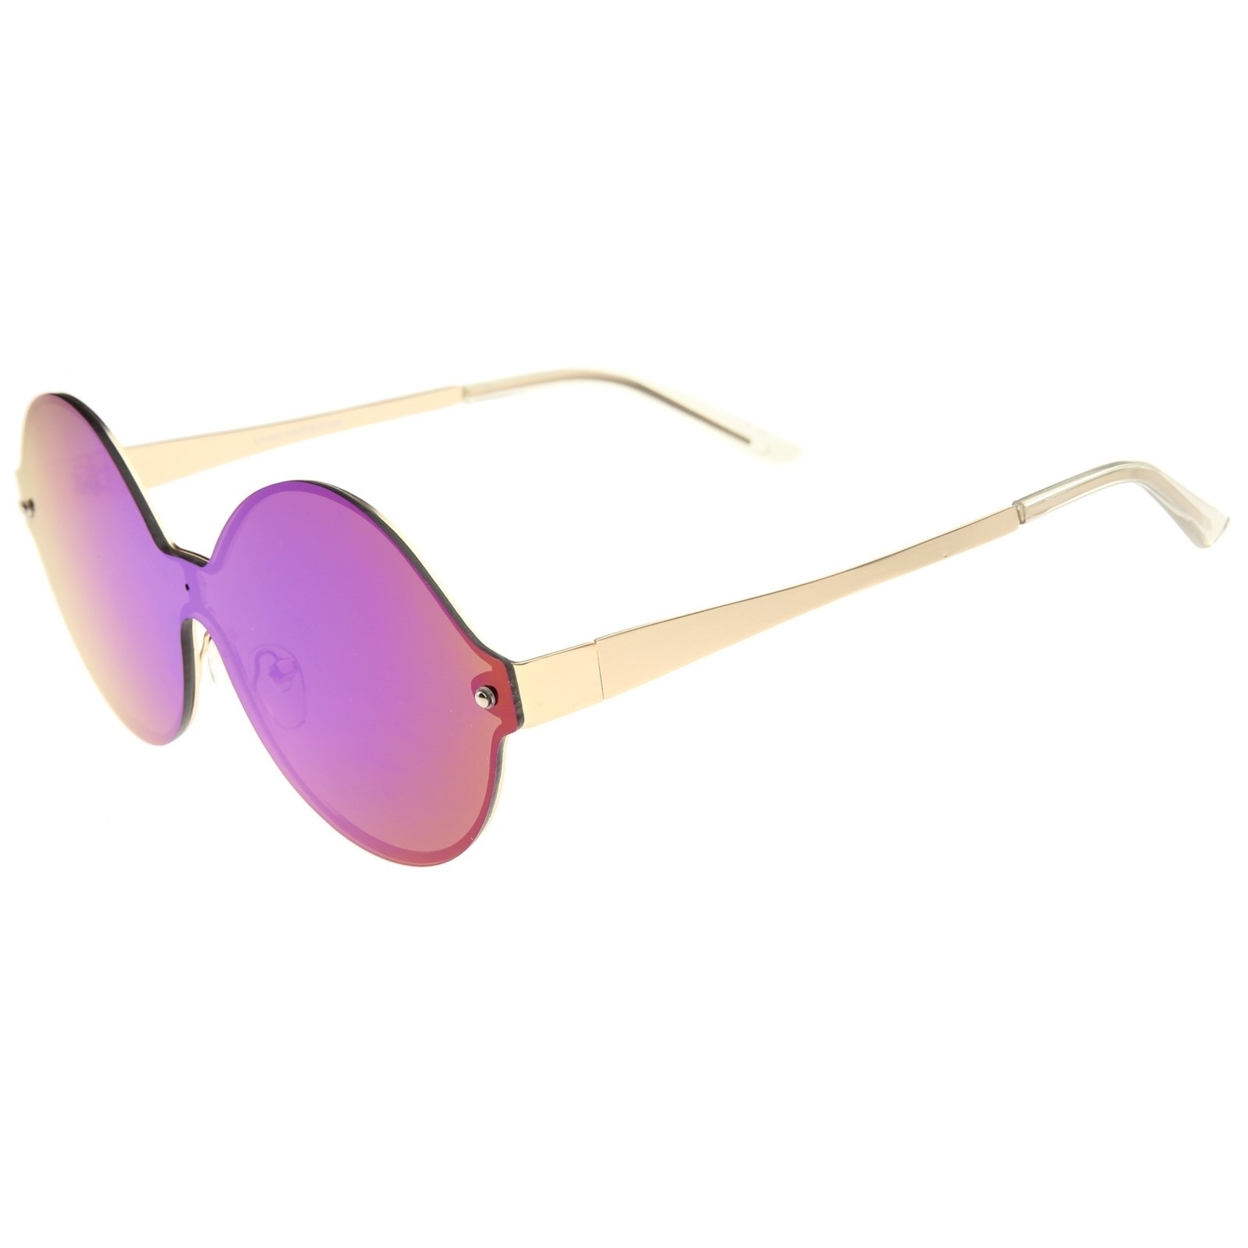 Oversize Round Color Mirror Shield Lens Metal Temple Rimless Sunglasses 69mm - Gold / Pink Mirror